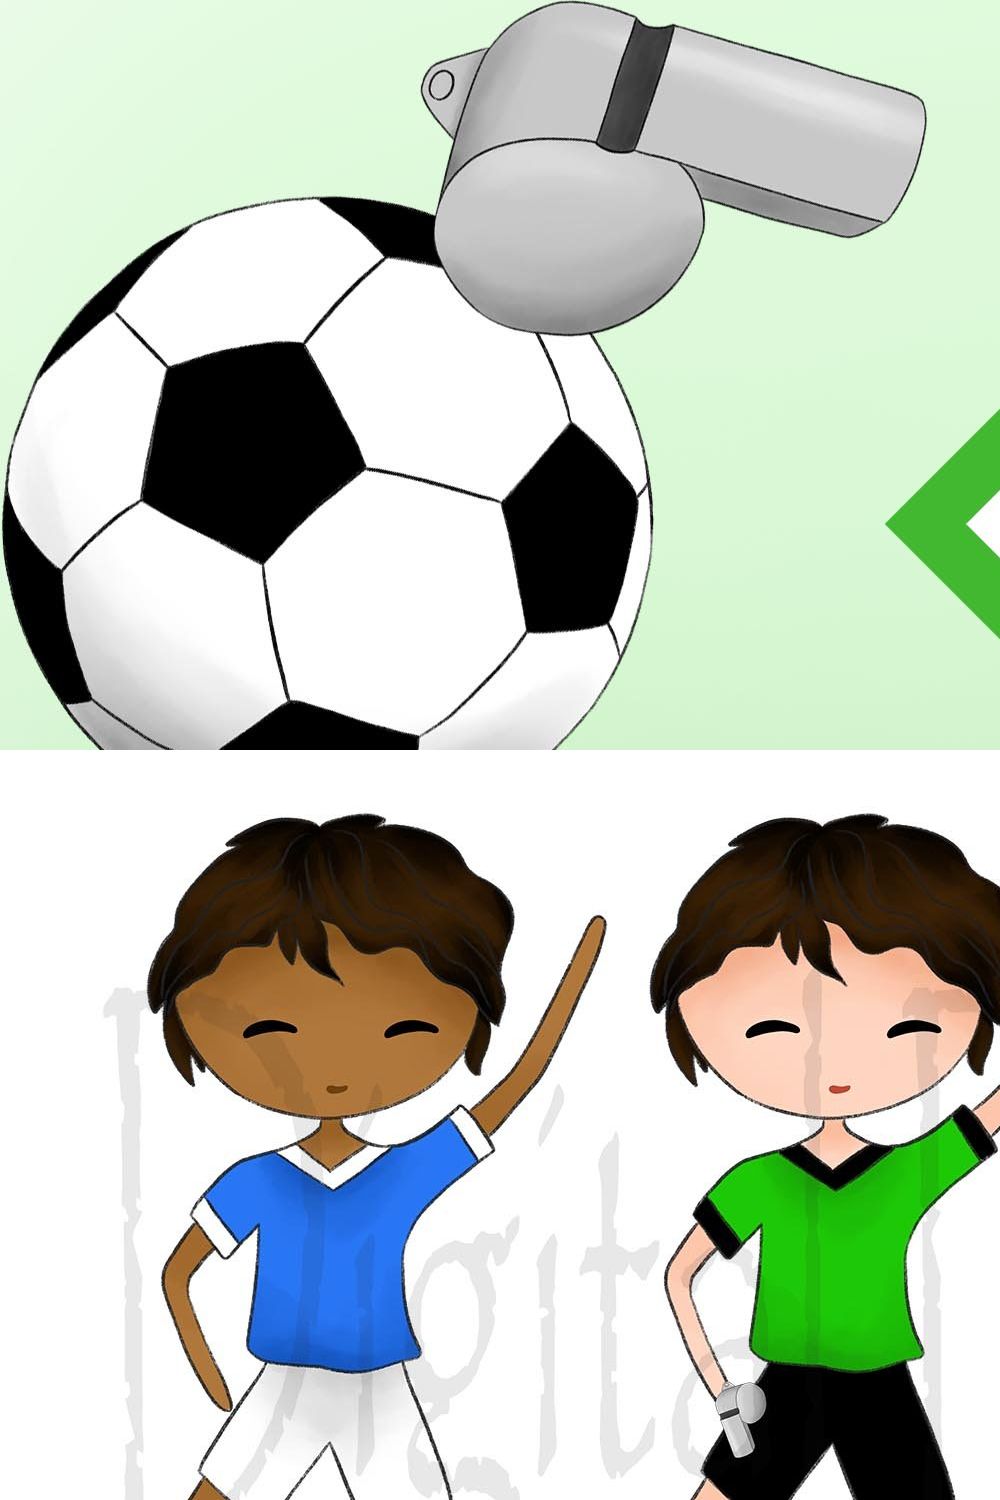 Soccer/football clipart pinterest preview image.